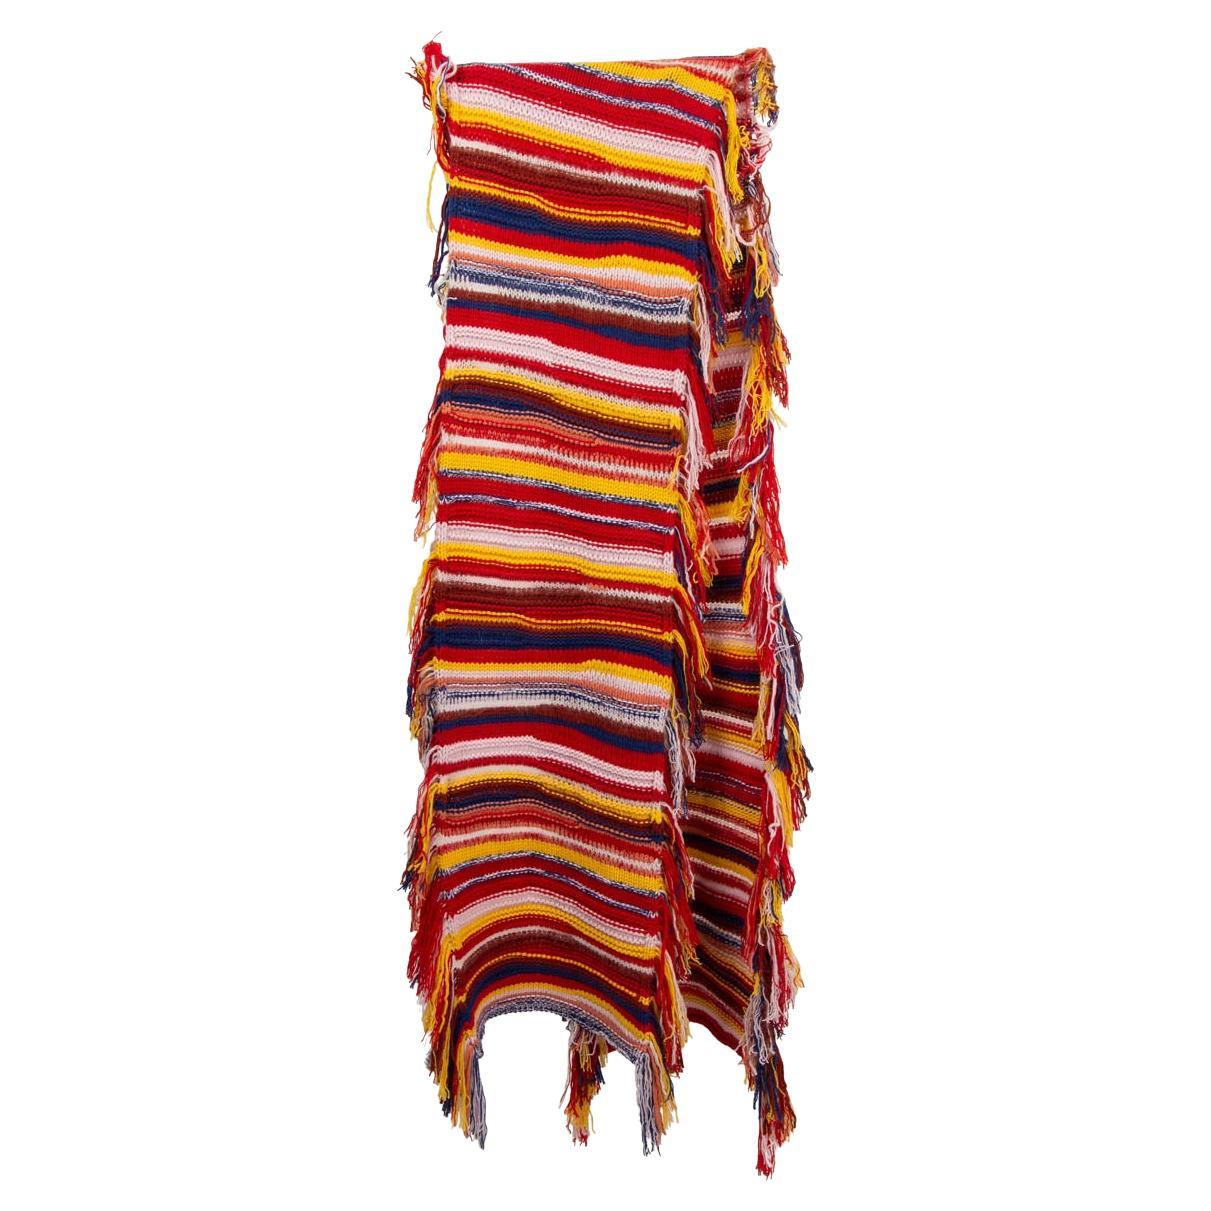 CHLOE red multicolor cashmere blend STRIPED FRINGED KNIT MUFFLER Scarf